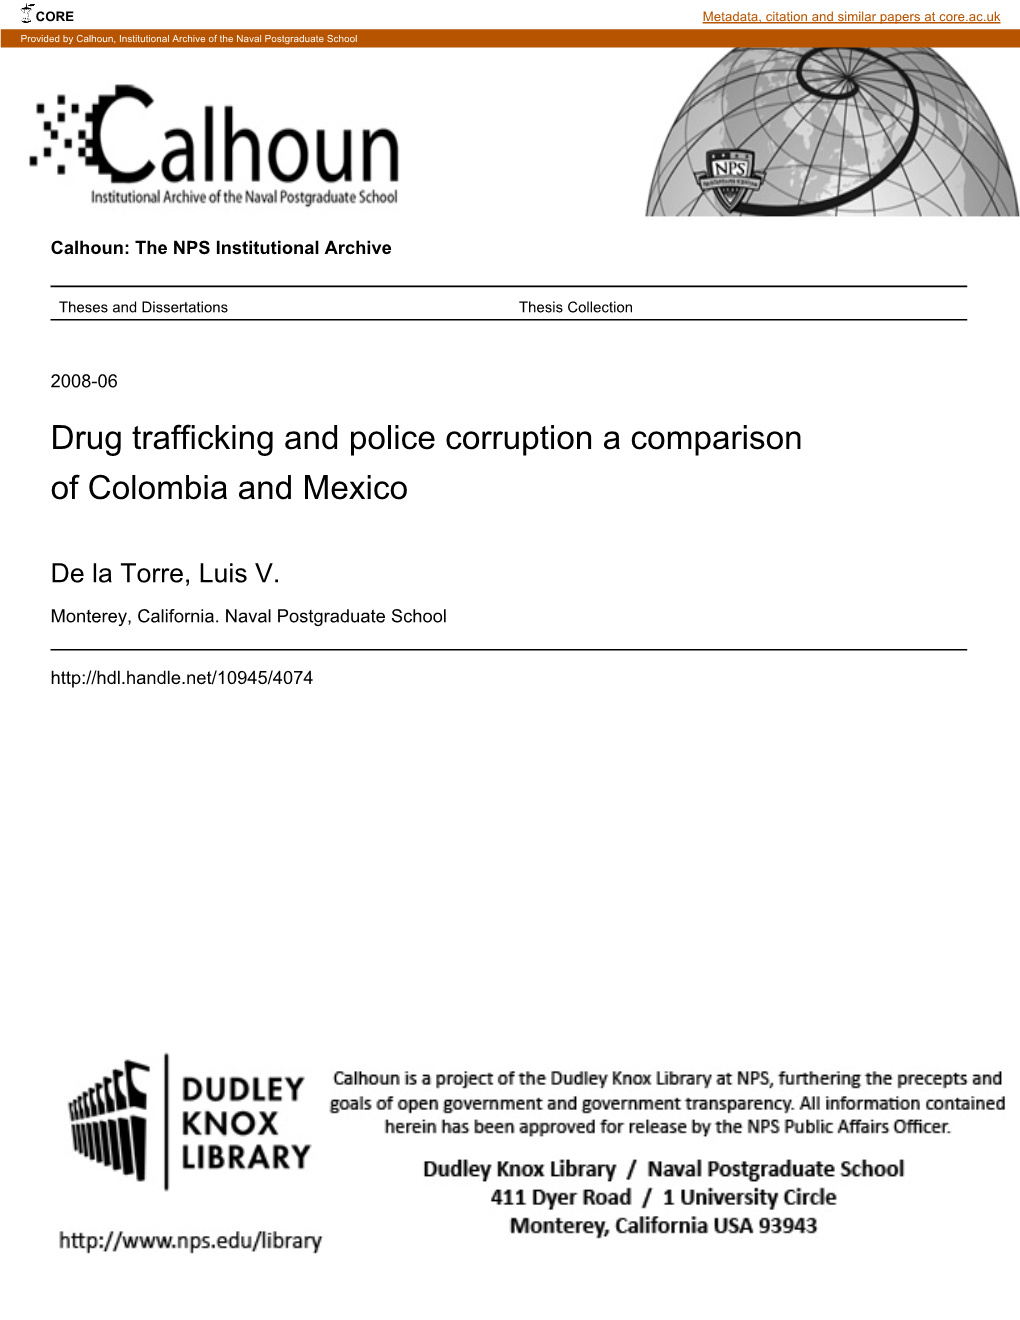 Drug Trafficking and Police Corruption a Comparison of Colombia and Mexico